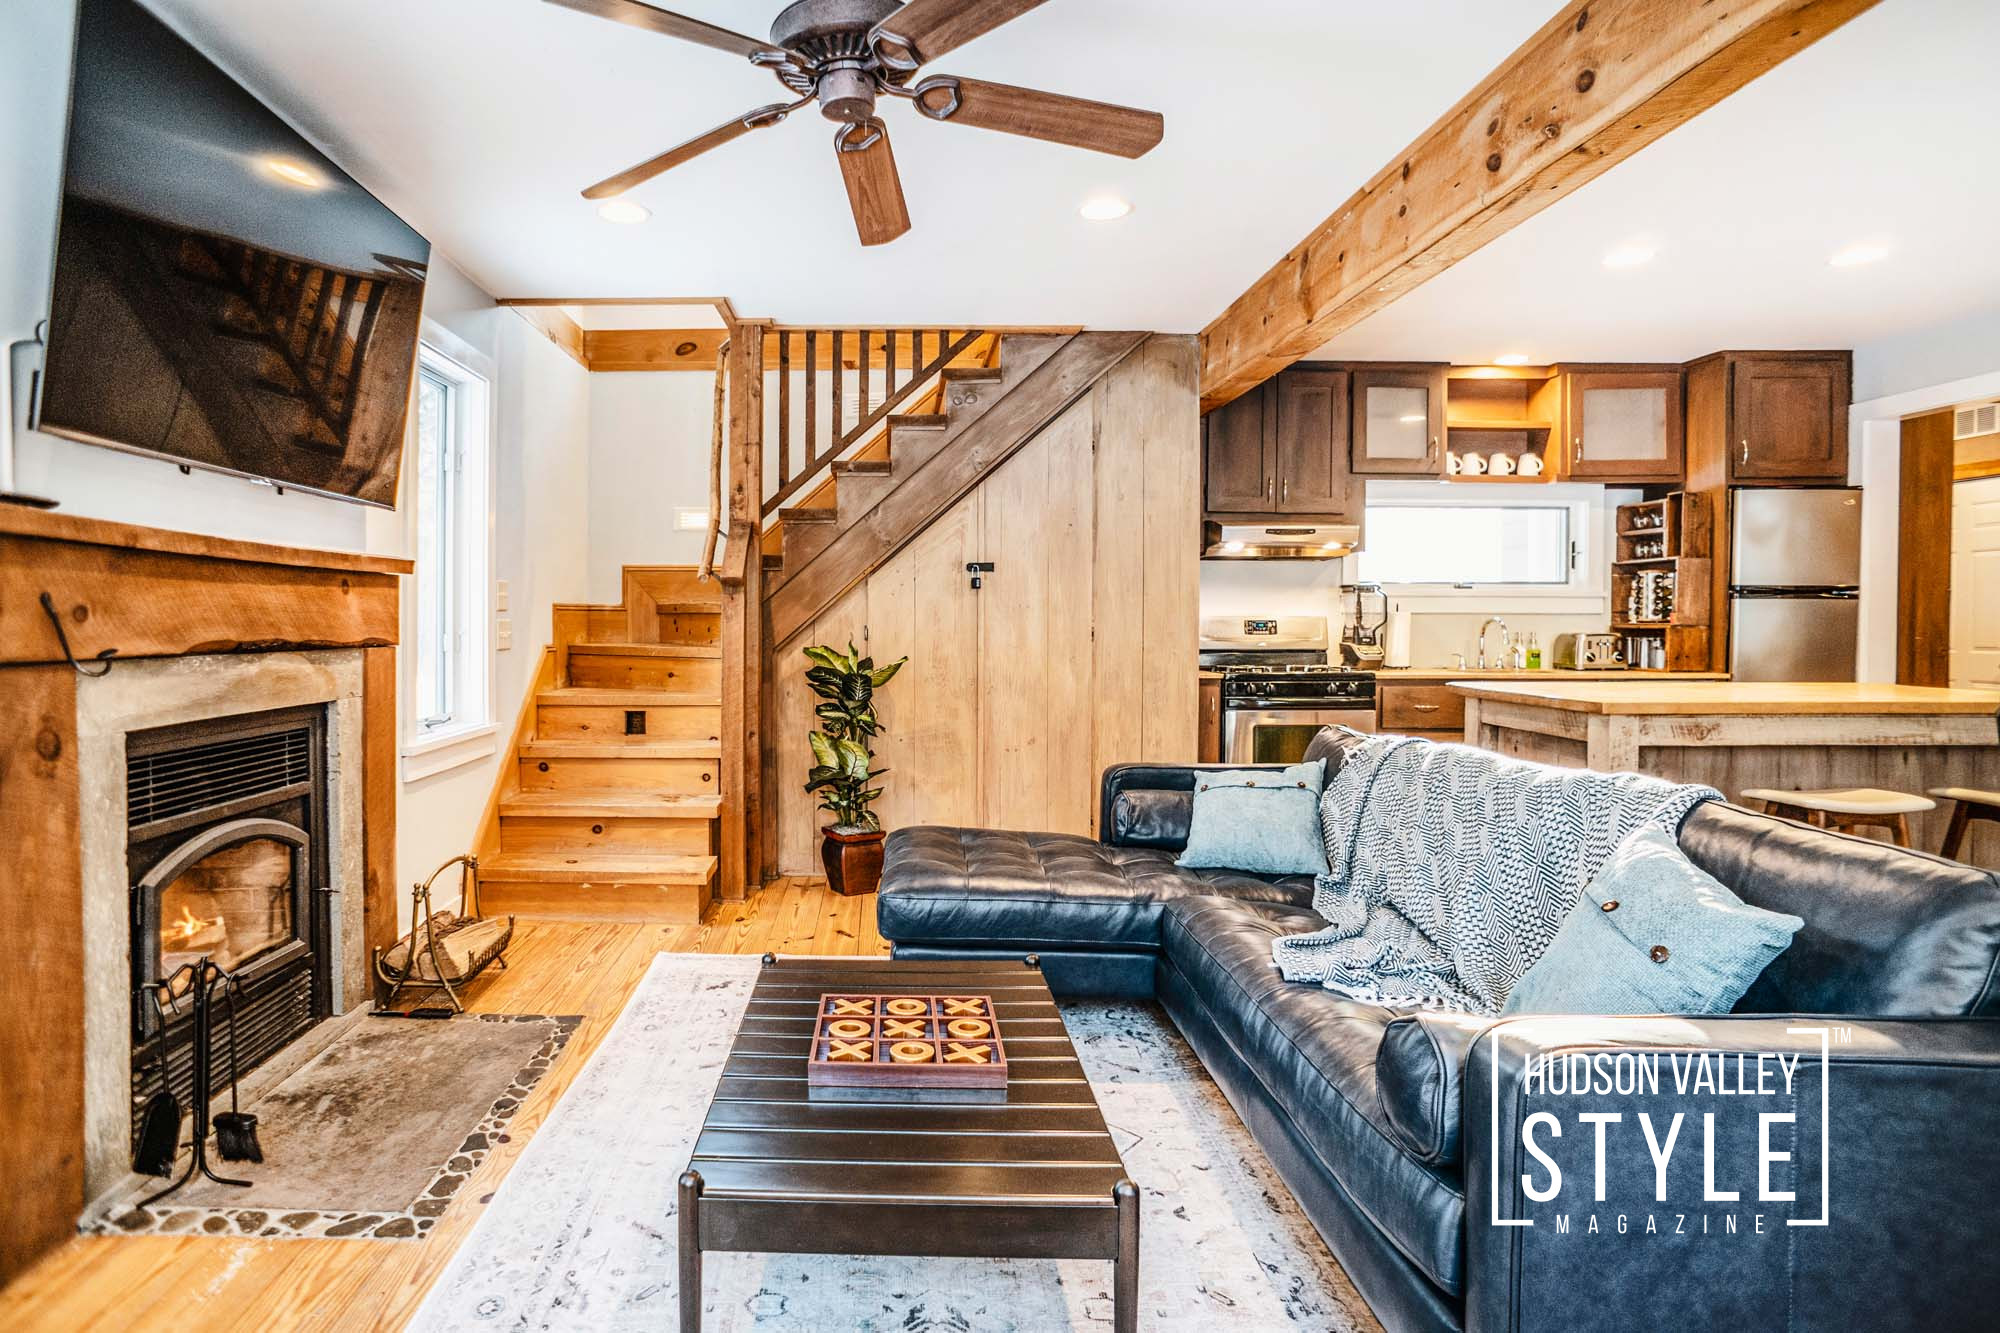 Hudson Valley Getaway – Rustic Cabin in the Shawangunk Mountains | Hudson Valley Style Magazine Airbnb Tour | Photography by ALLUVION Media – Duncan Avenue Studios